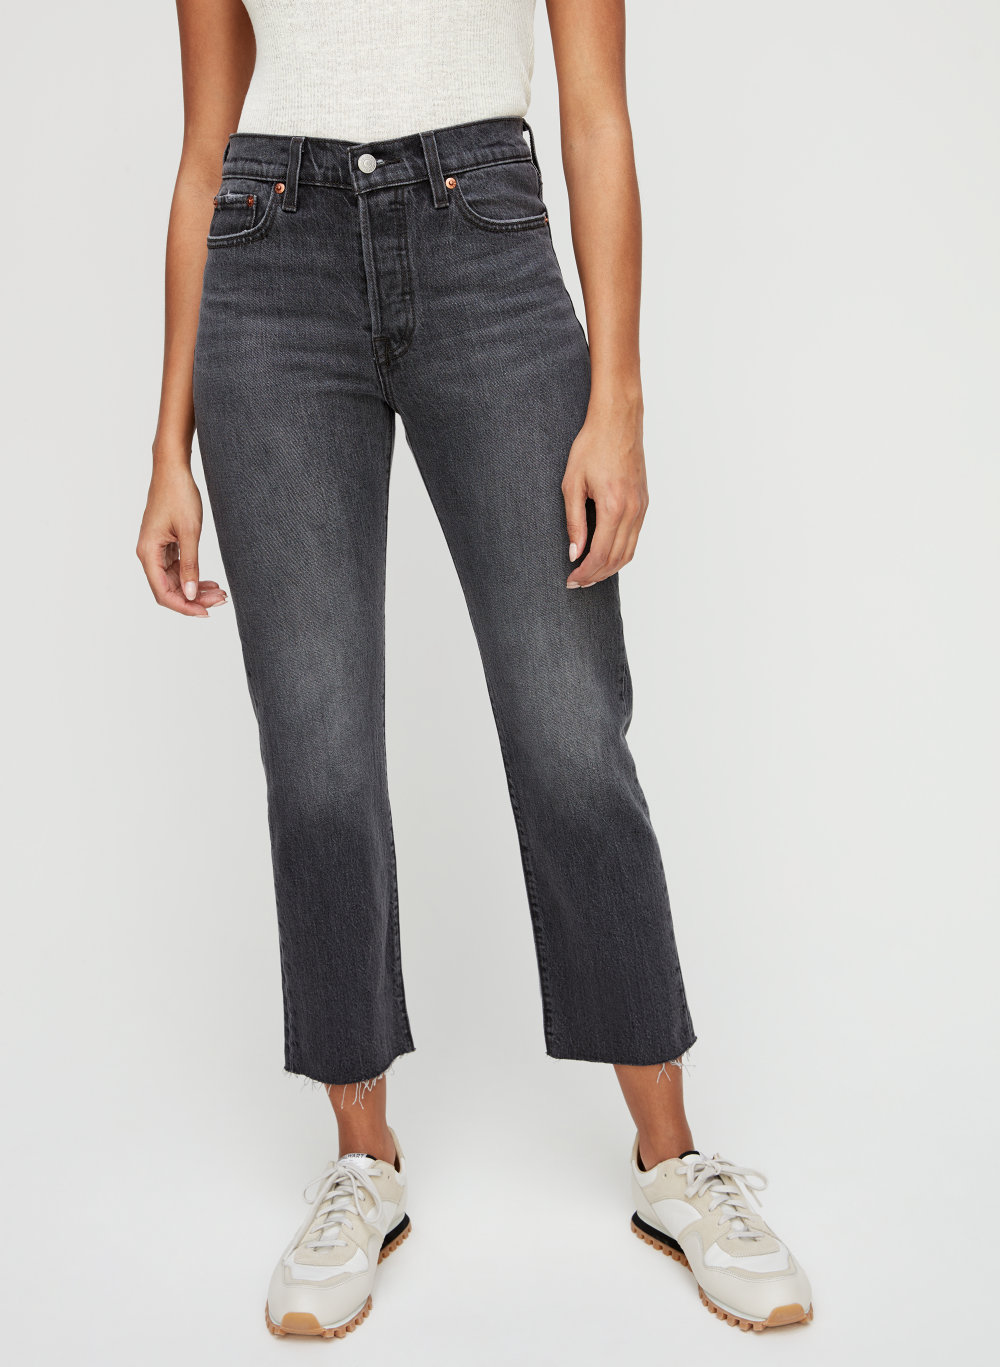 levi's wedgie straight jeans black